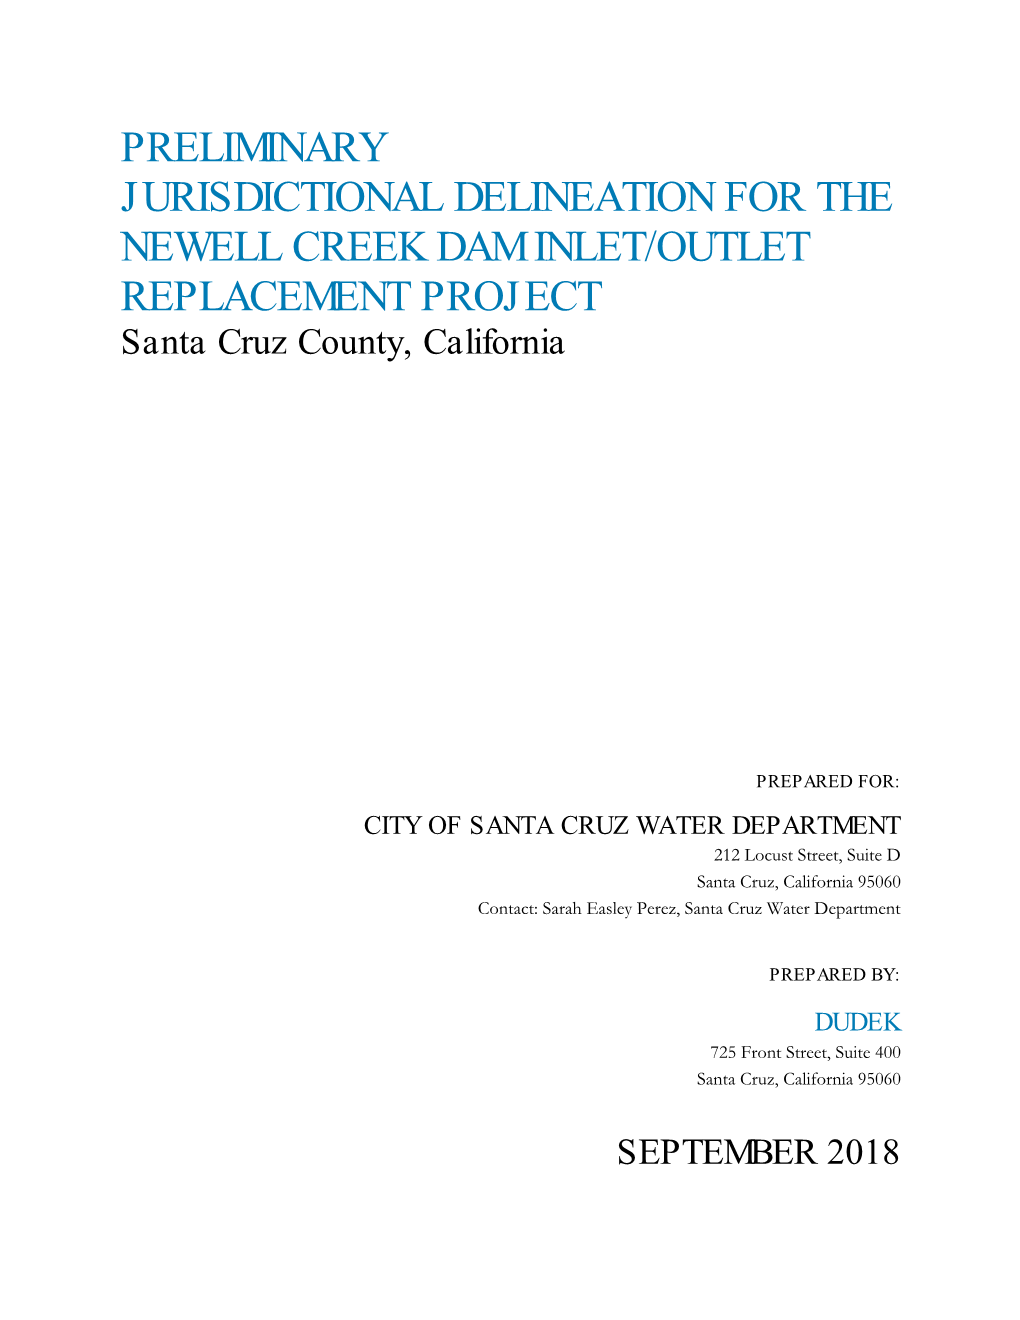 PRELIMINARY JURISDICTIONAL DELINEATION for the NEWELL CREEK DAM INLET/OUTLET REPLACEMENT PROJECT Santa Cruz County, California